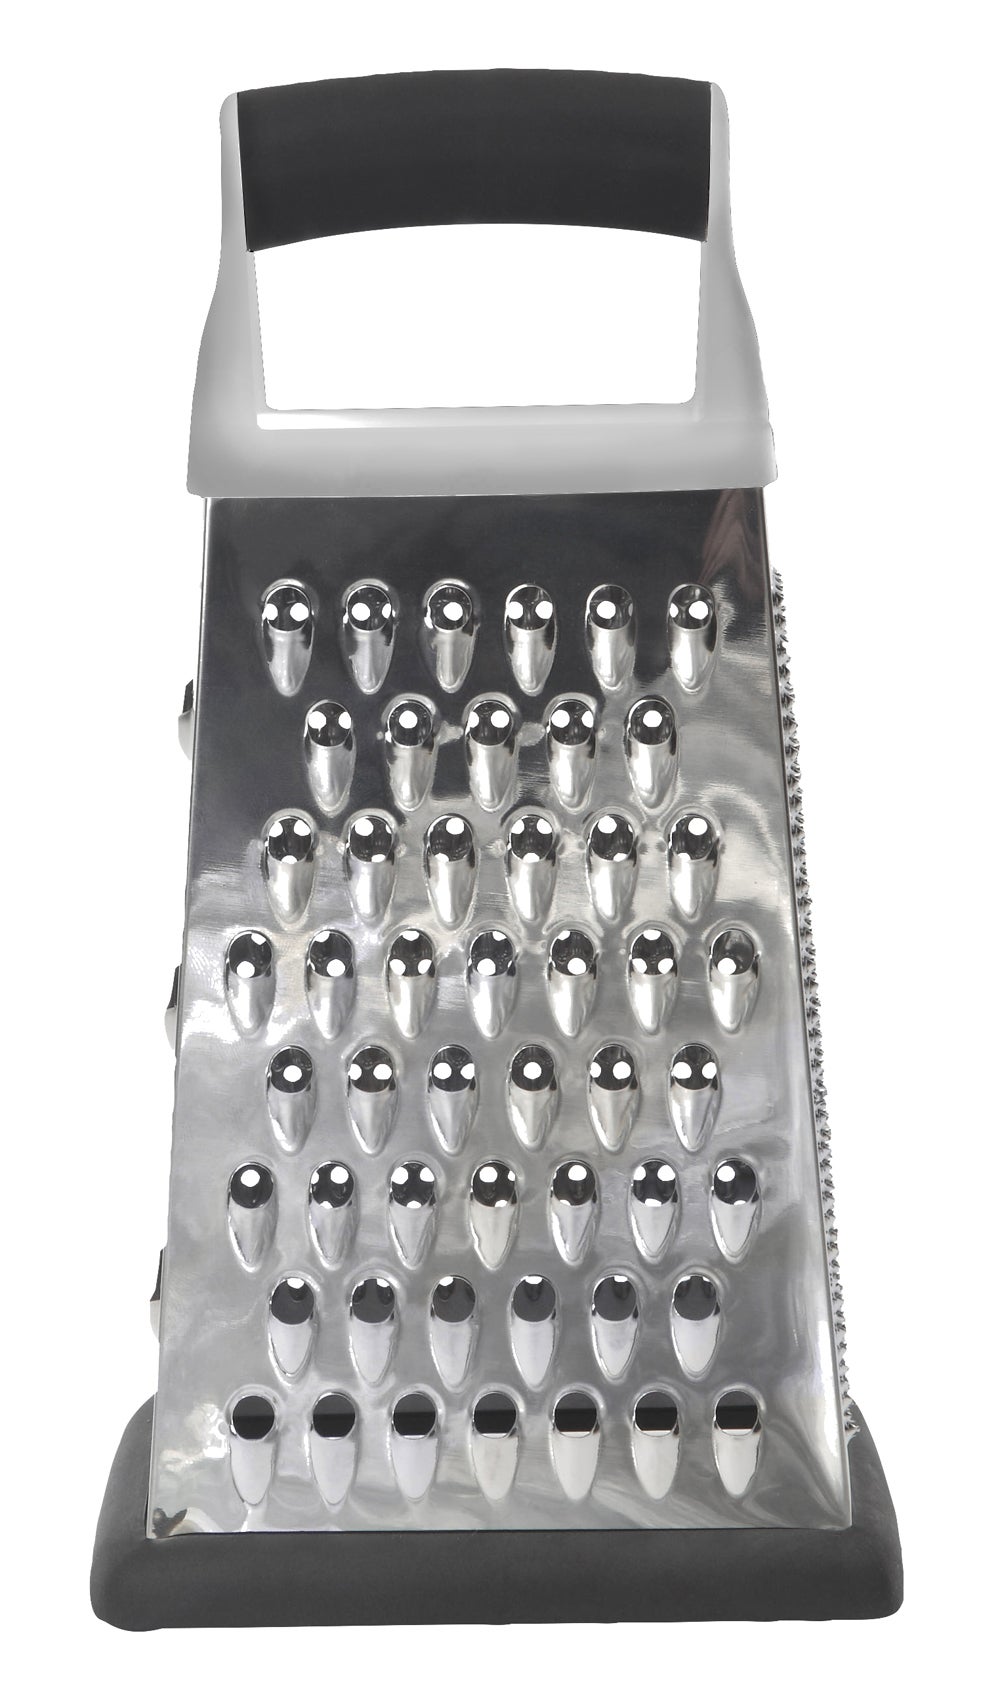 Dexam Stainless Steel Four Sided Box Grater